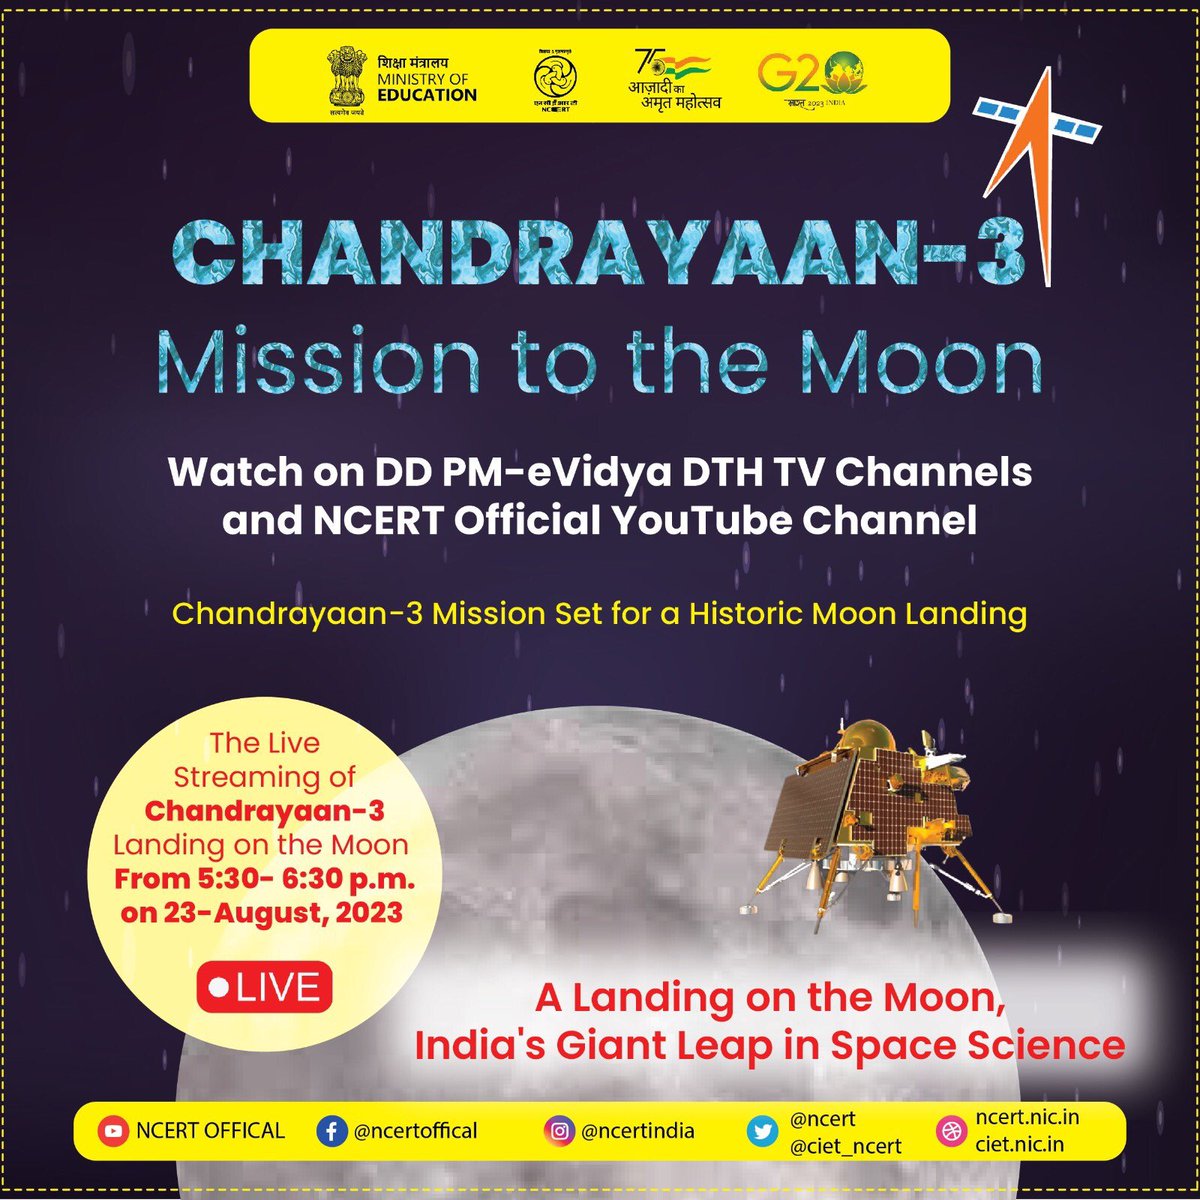 🌕 Witness India's Giant Leap on the Moon 🚀🇮🇳 Join us LIVE for the Spectacular Chandrayaan-3 Moon Landing on August 23, 5:30 - 6:30 p.m. (IST)! 🛰️ Catch the Repeat Telecast on August 24, 11:30 a.m. - 12:30 p.m.